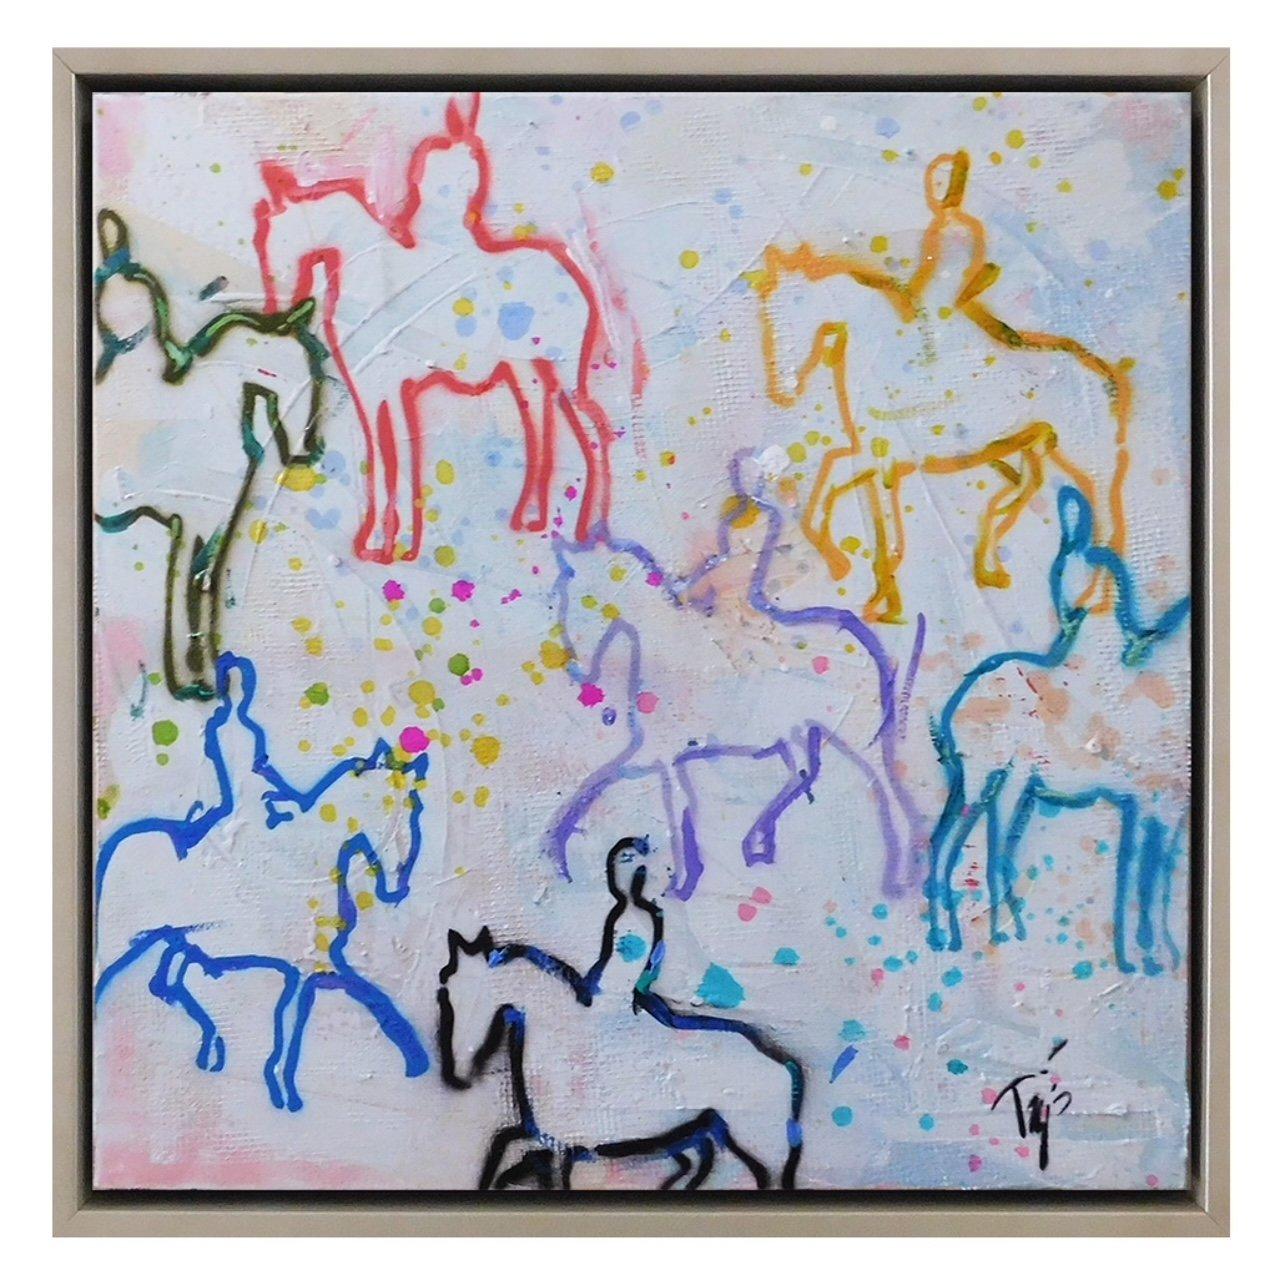 Trip Park, "Funny Horses", 20x20 Abstract Colorful Horse Oil Painting on Canvas